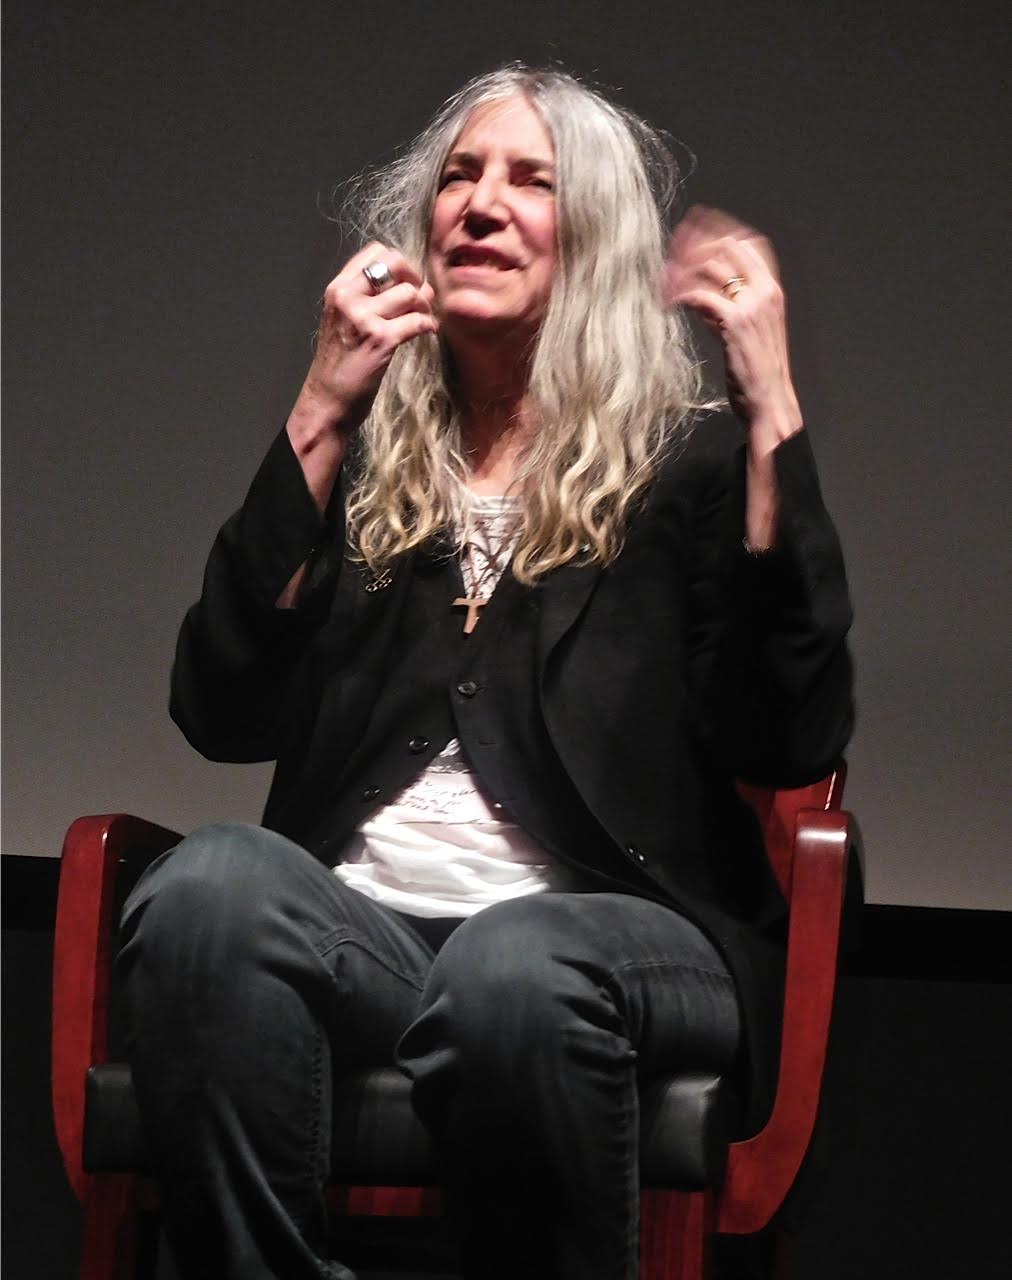 Things I Learned About Rocker/Poet Patti Smith at Tribeca Film Festival Talk Series